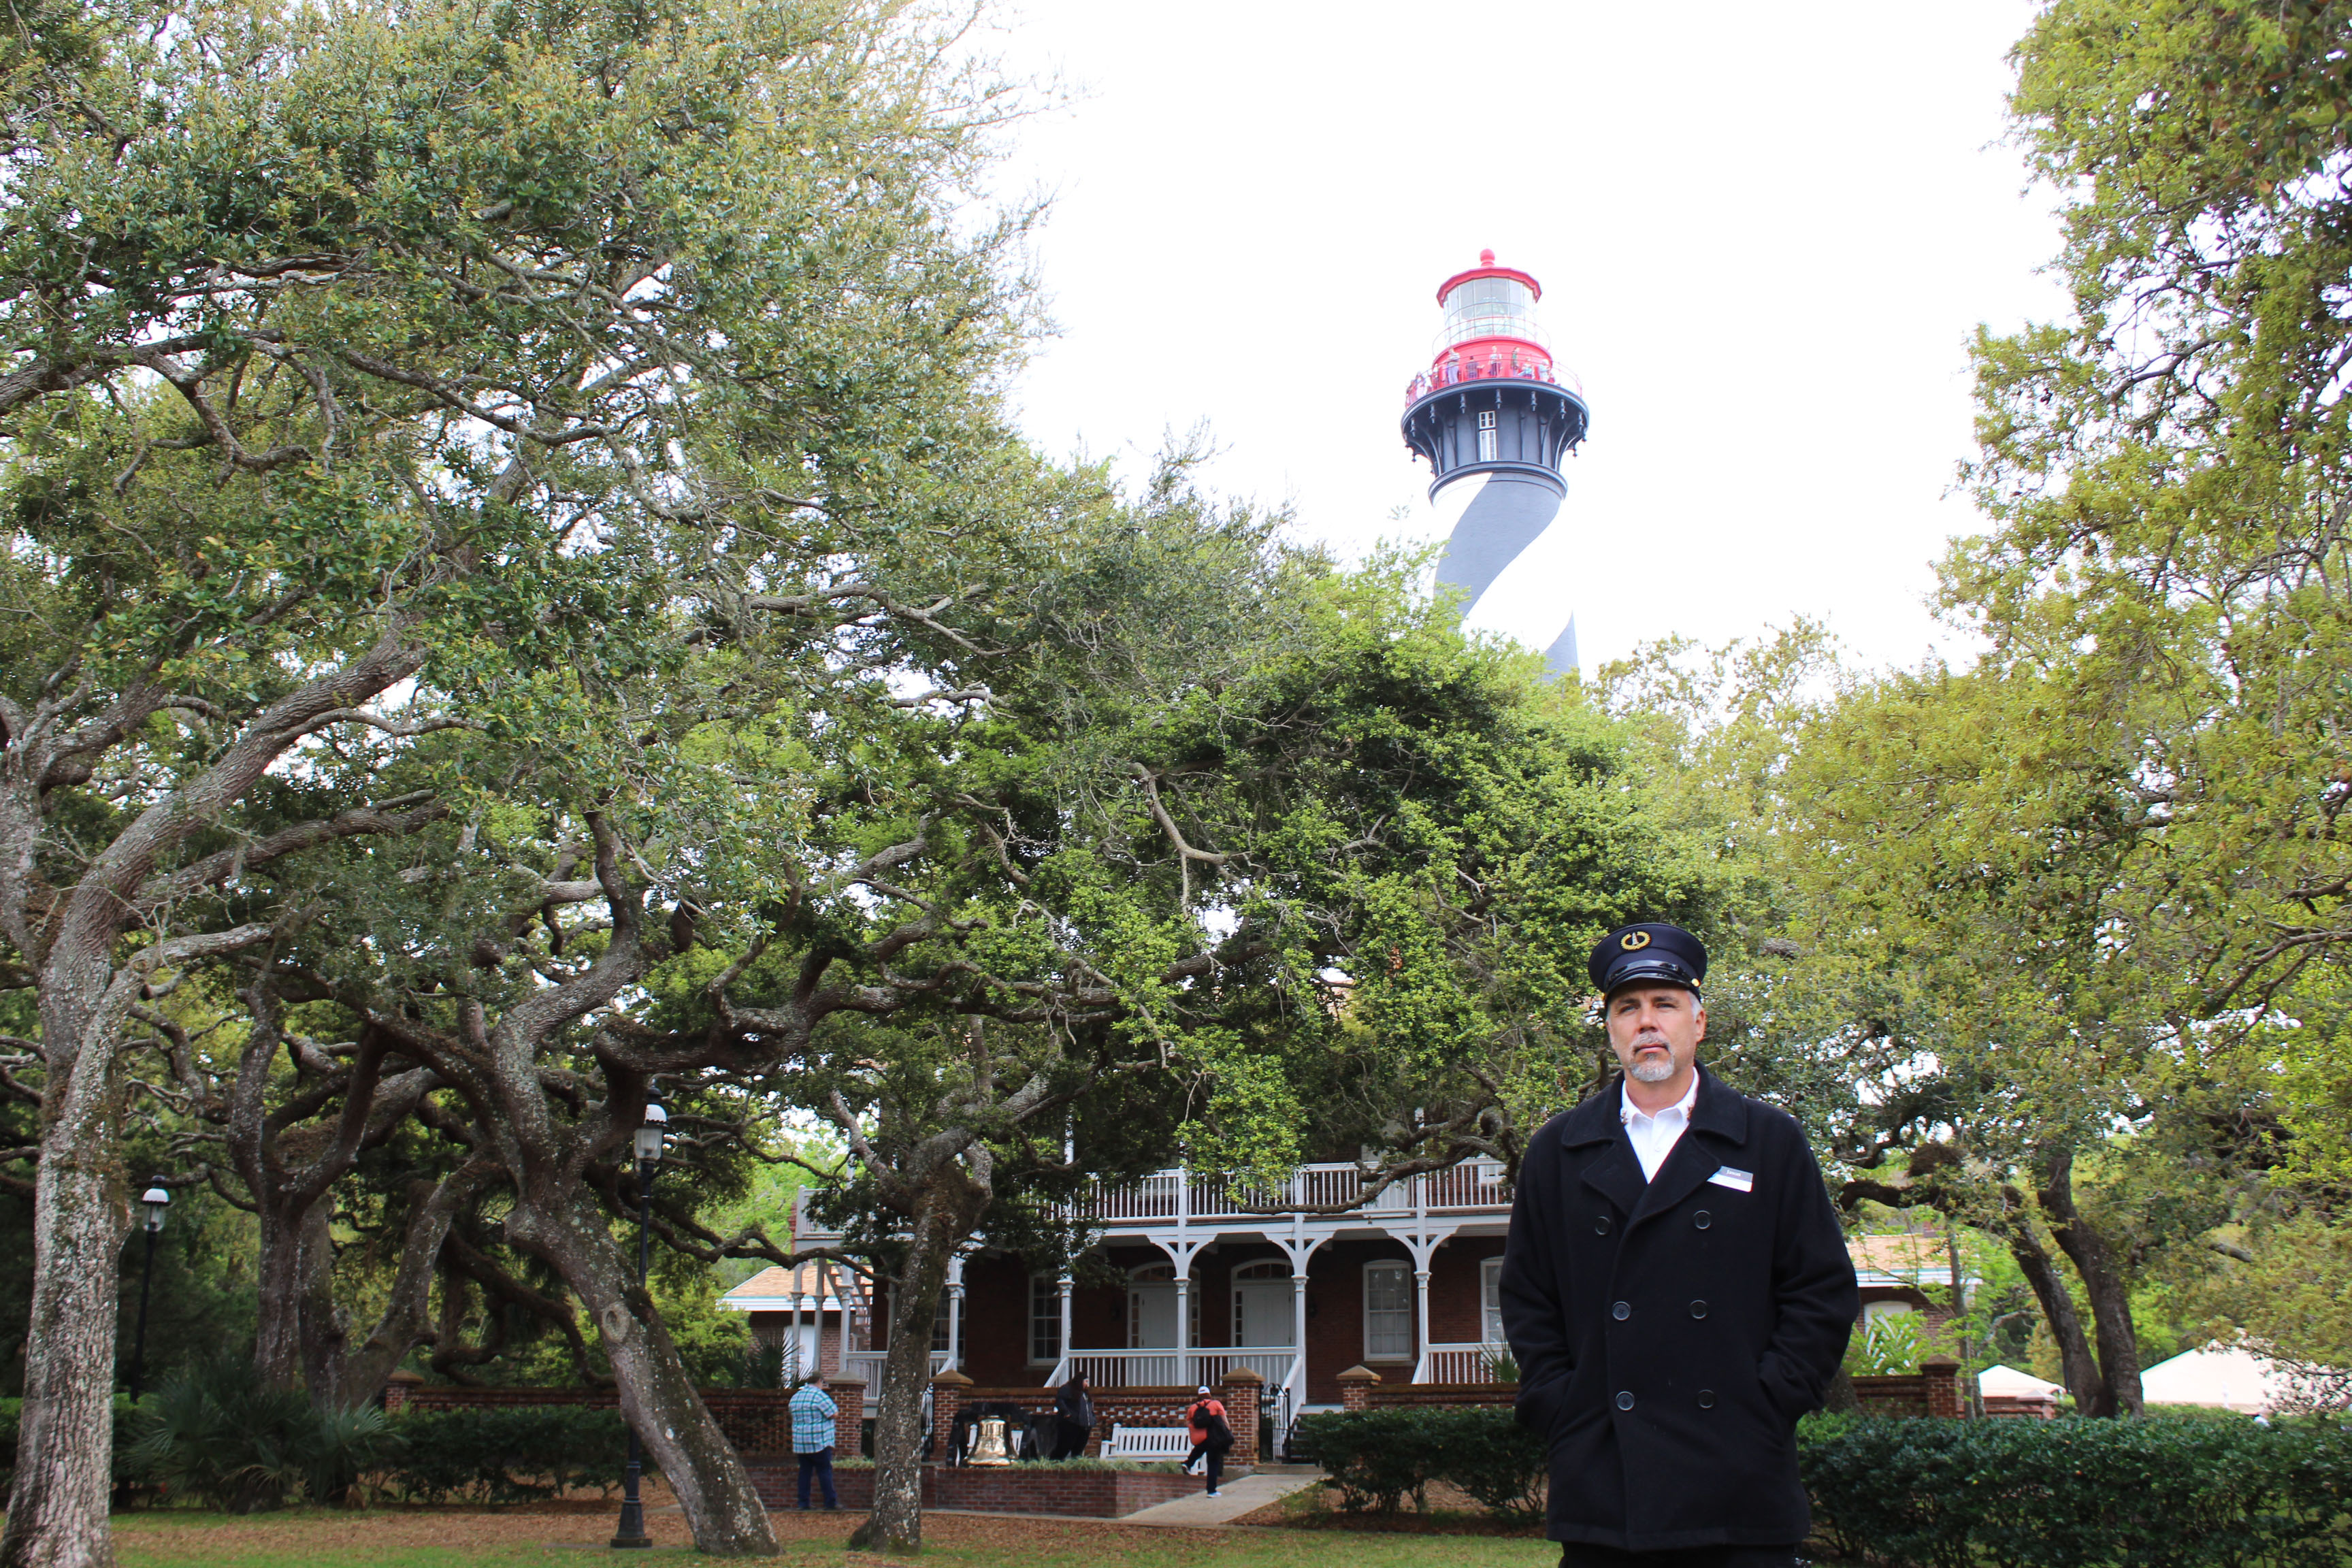 life of a lighthouse keeper